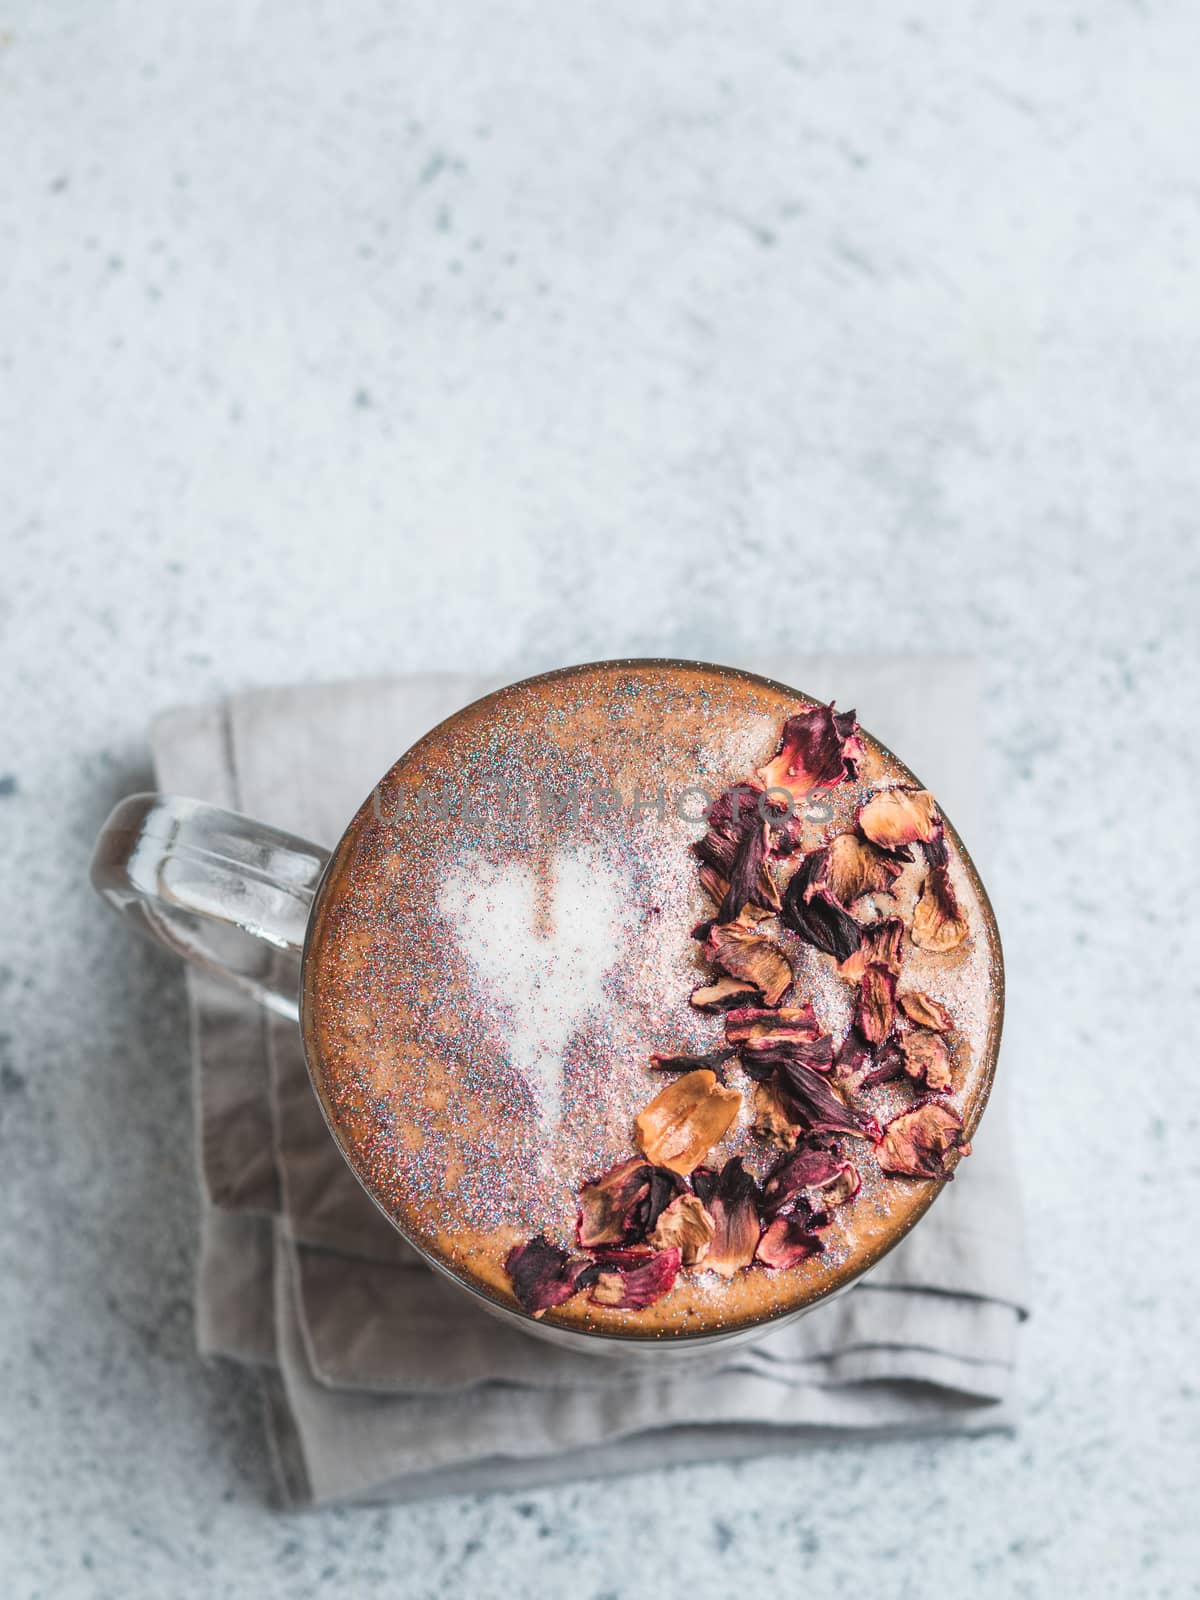 Trendy Coffee with edible glitter and dried rose petals. Cup of sparkly coffee or diamond cappuccino on gray table. Copy space for text. Top view or flat lay. Vertical.